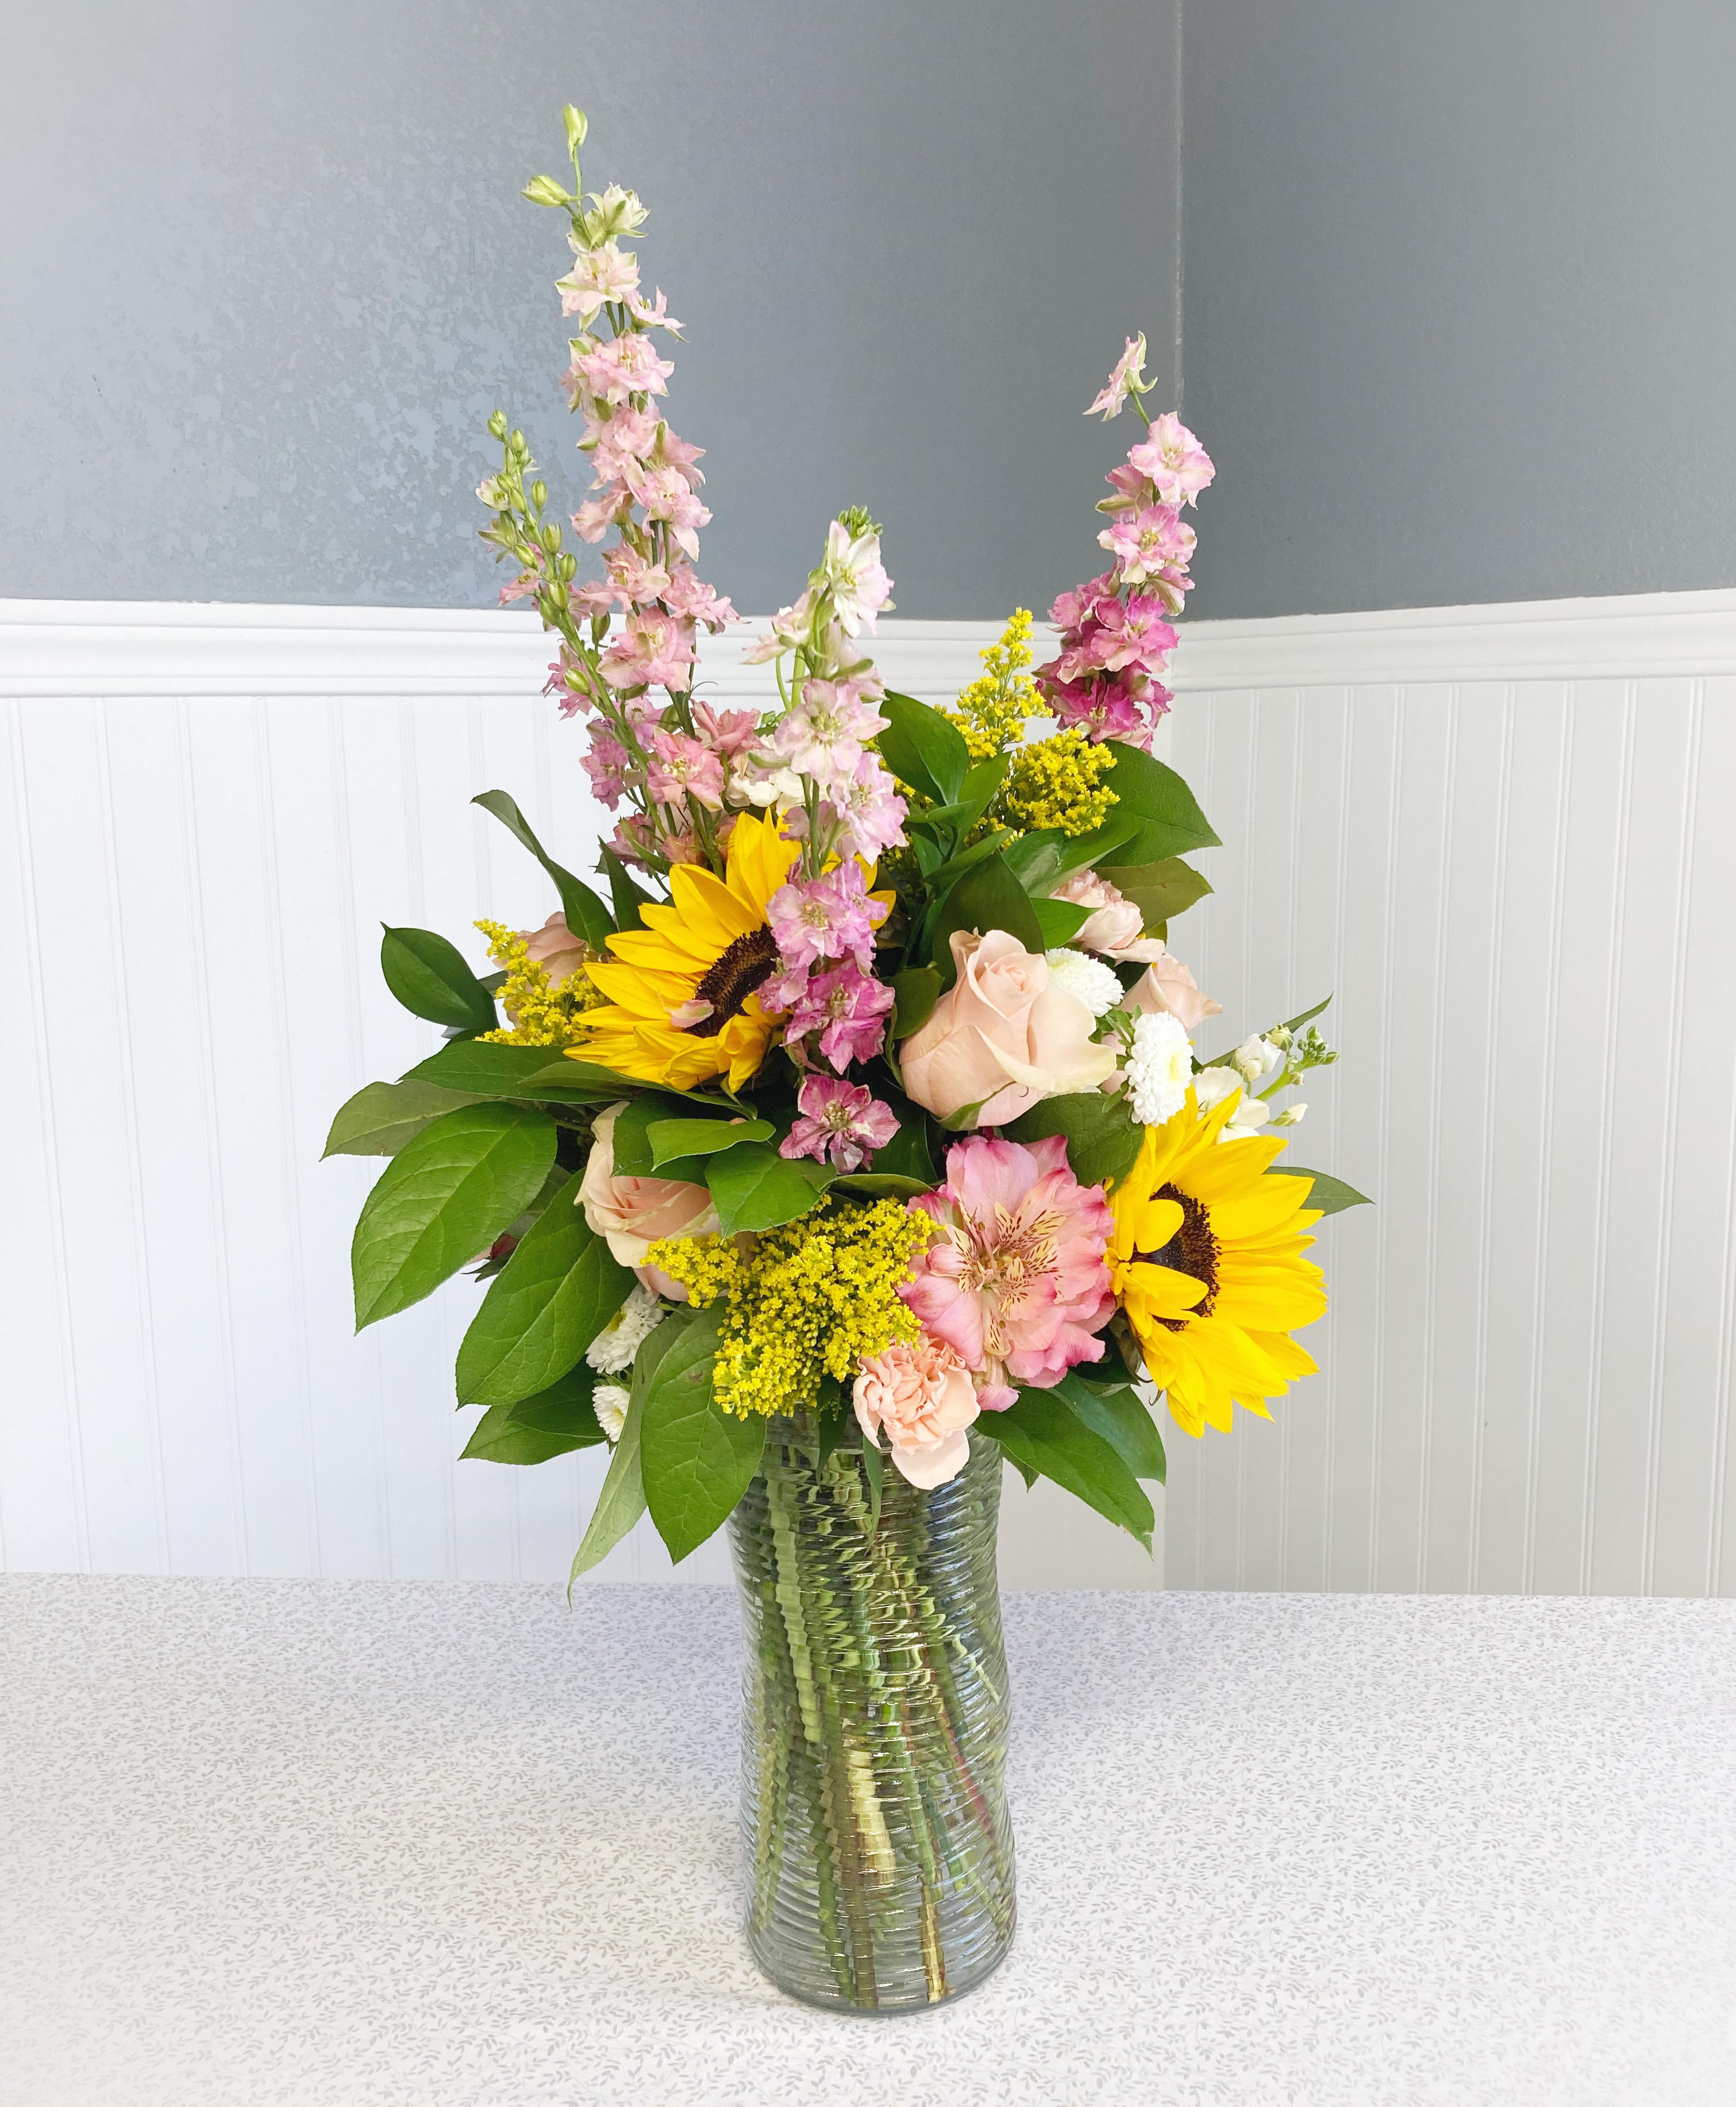 Pink Lemonade - With pops of pink and yellow, this bouquet can brighten up any occasion with it's cheerful, eye catching design!